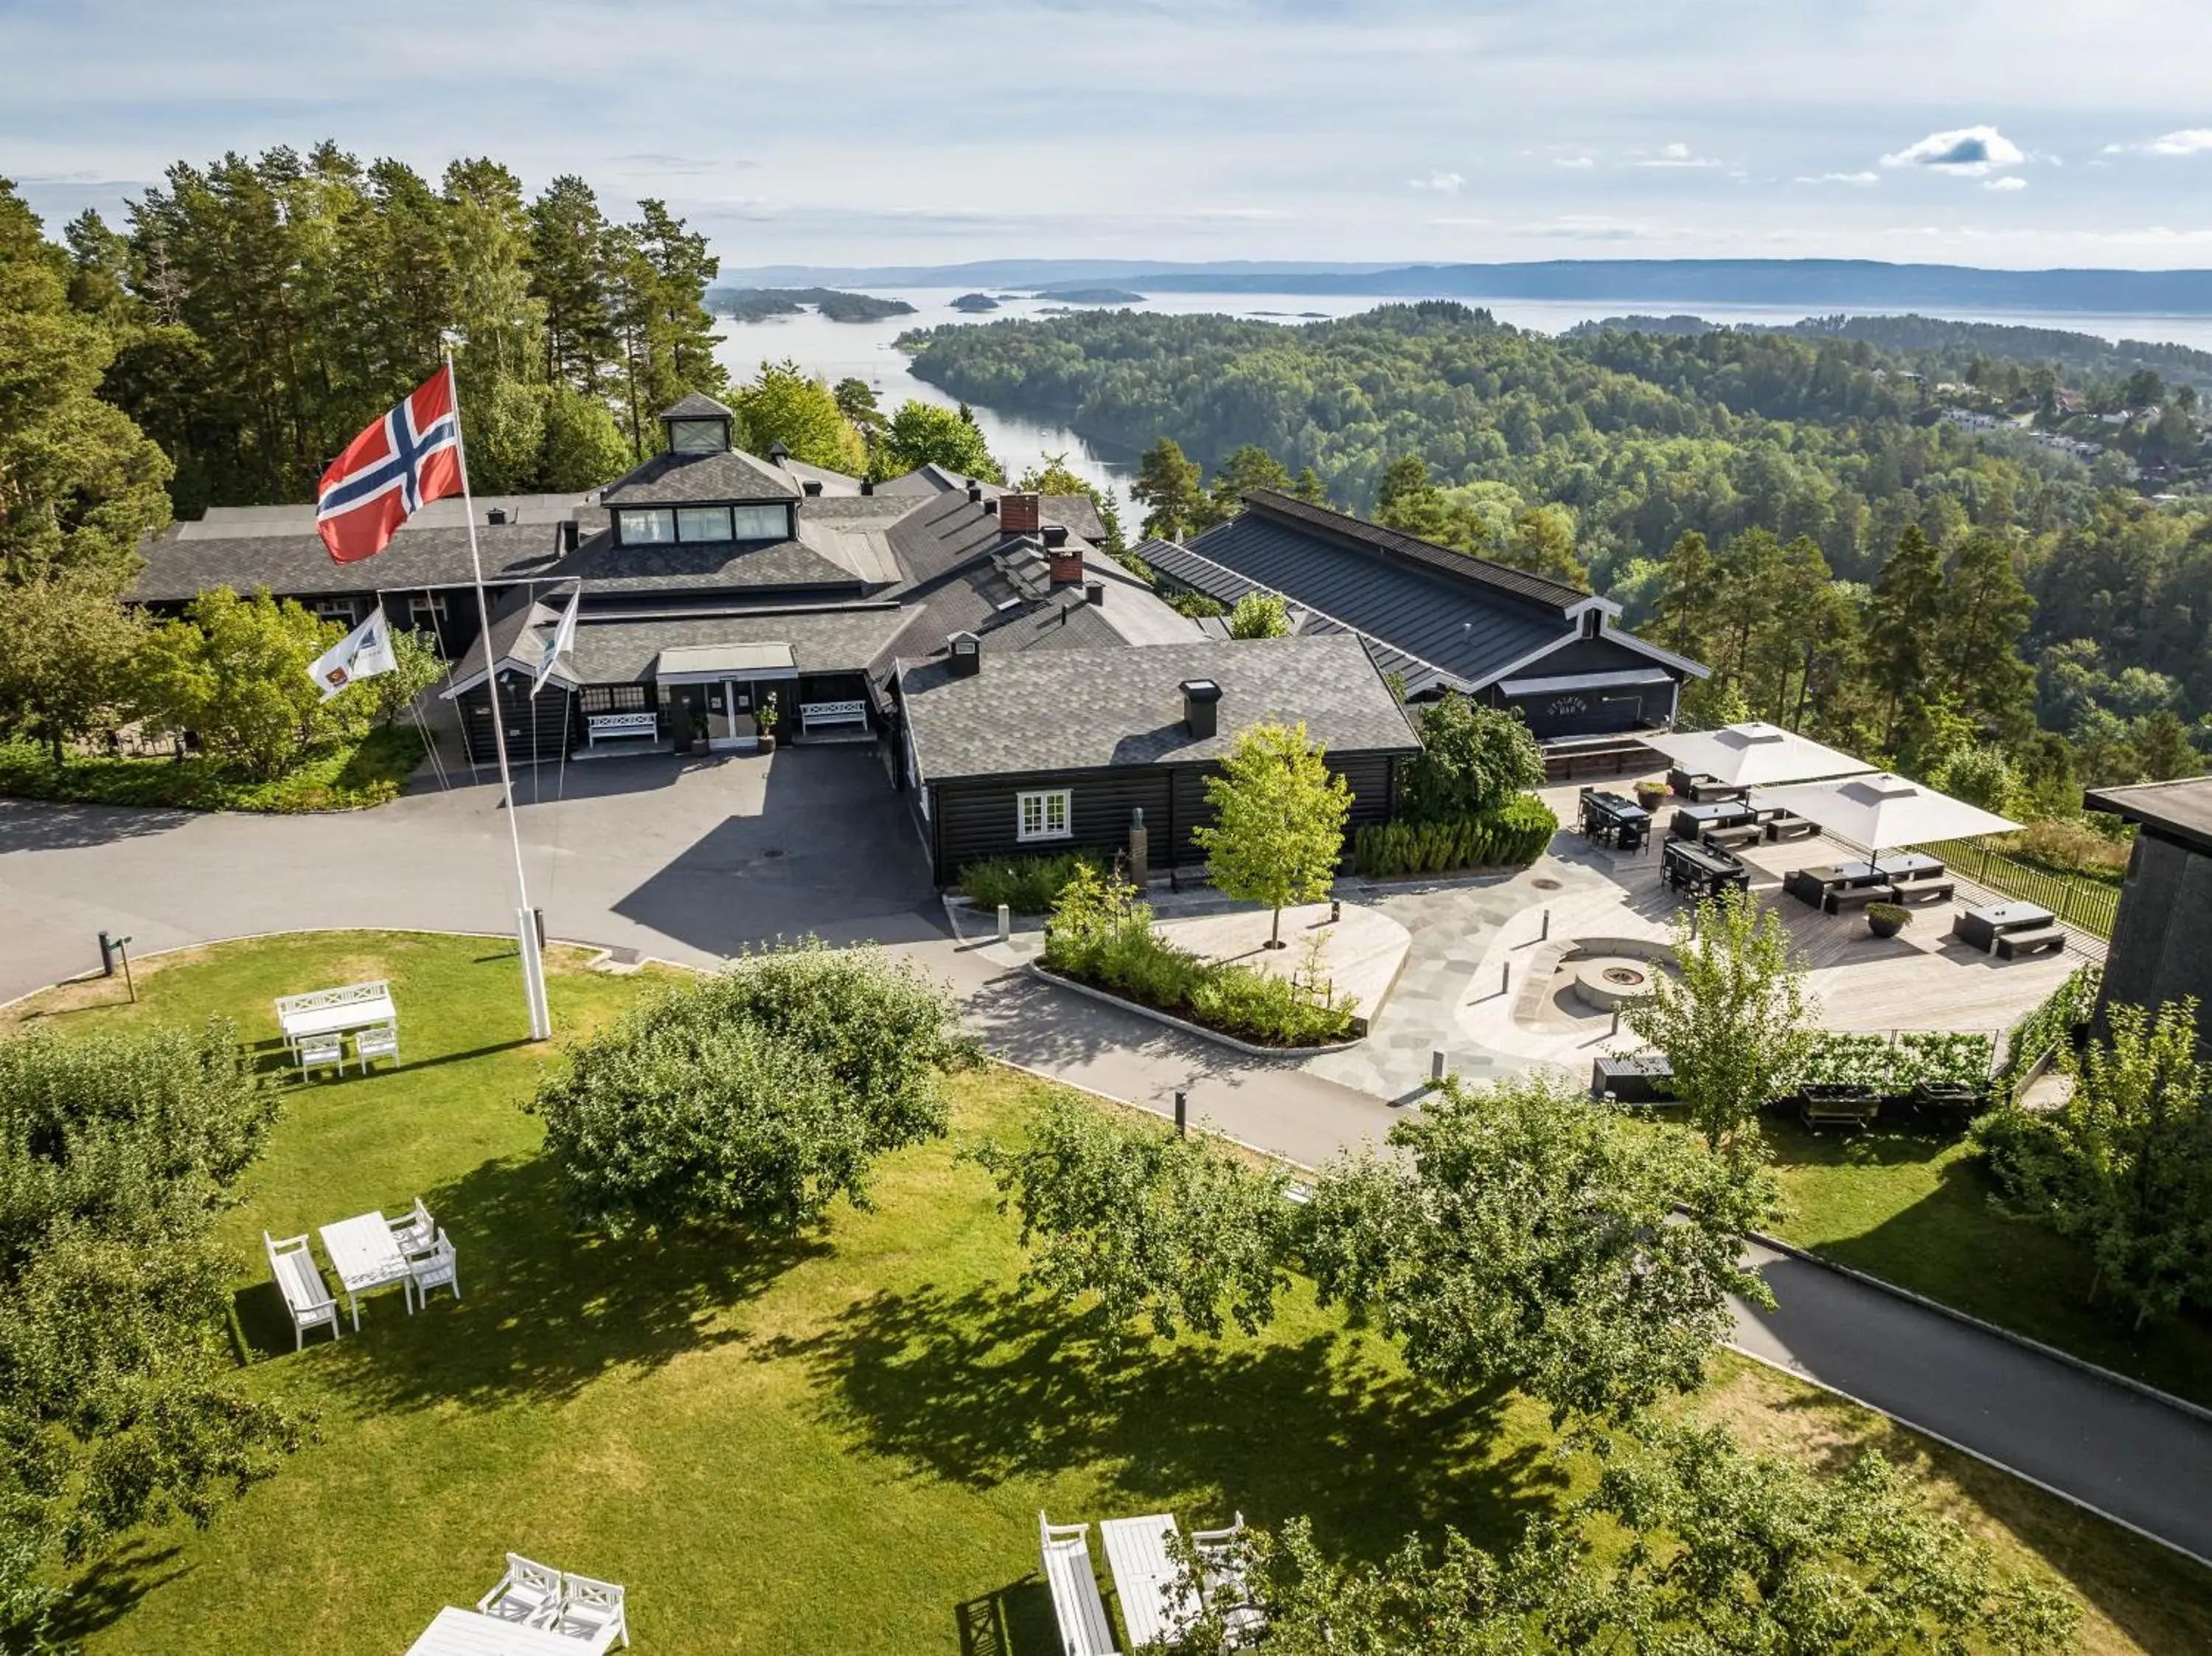 Property building, Bird's-eye View in Quality Hotel Leangkollen